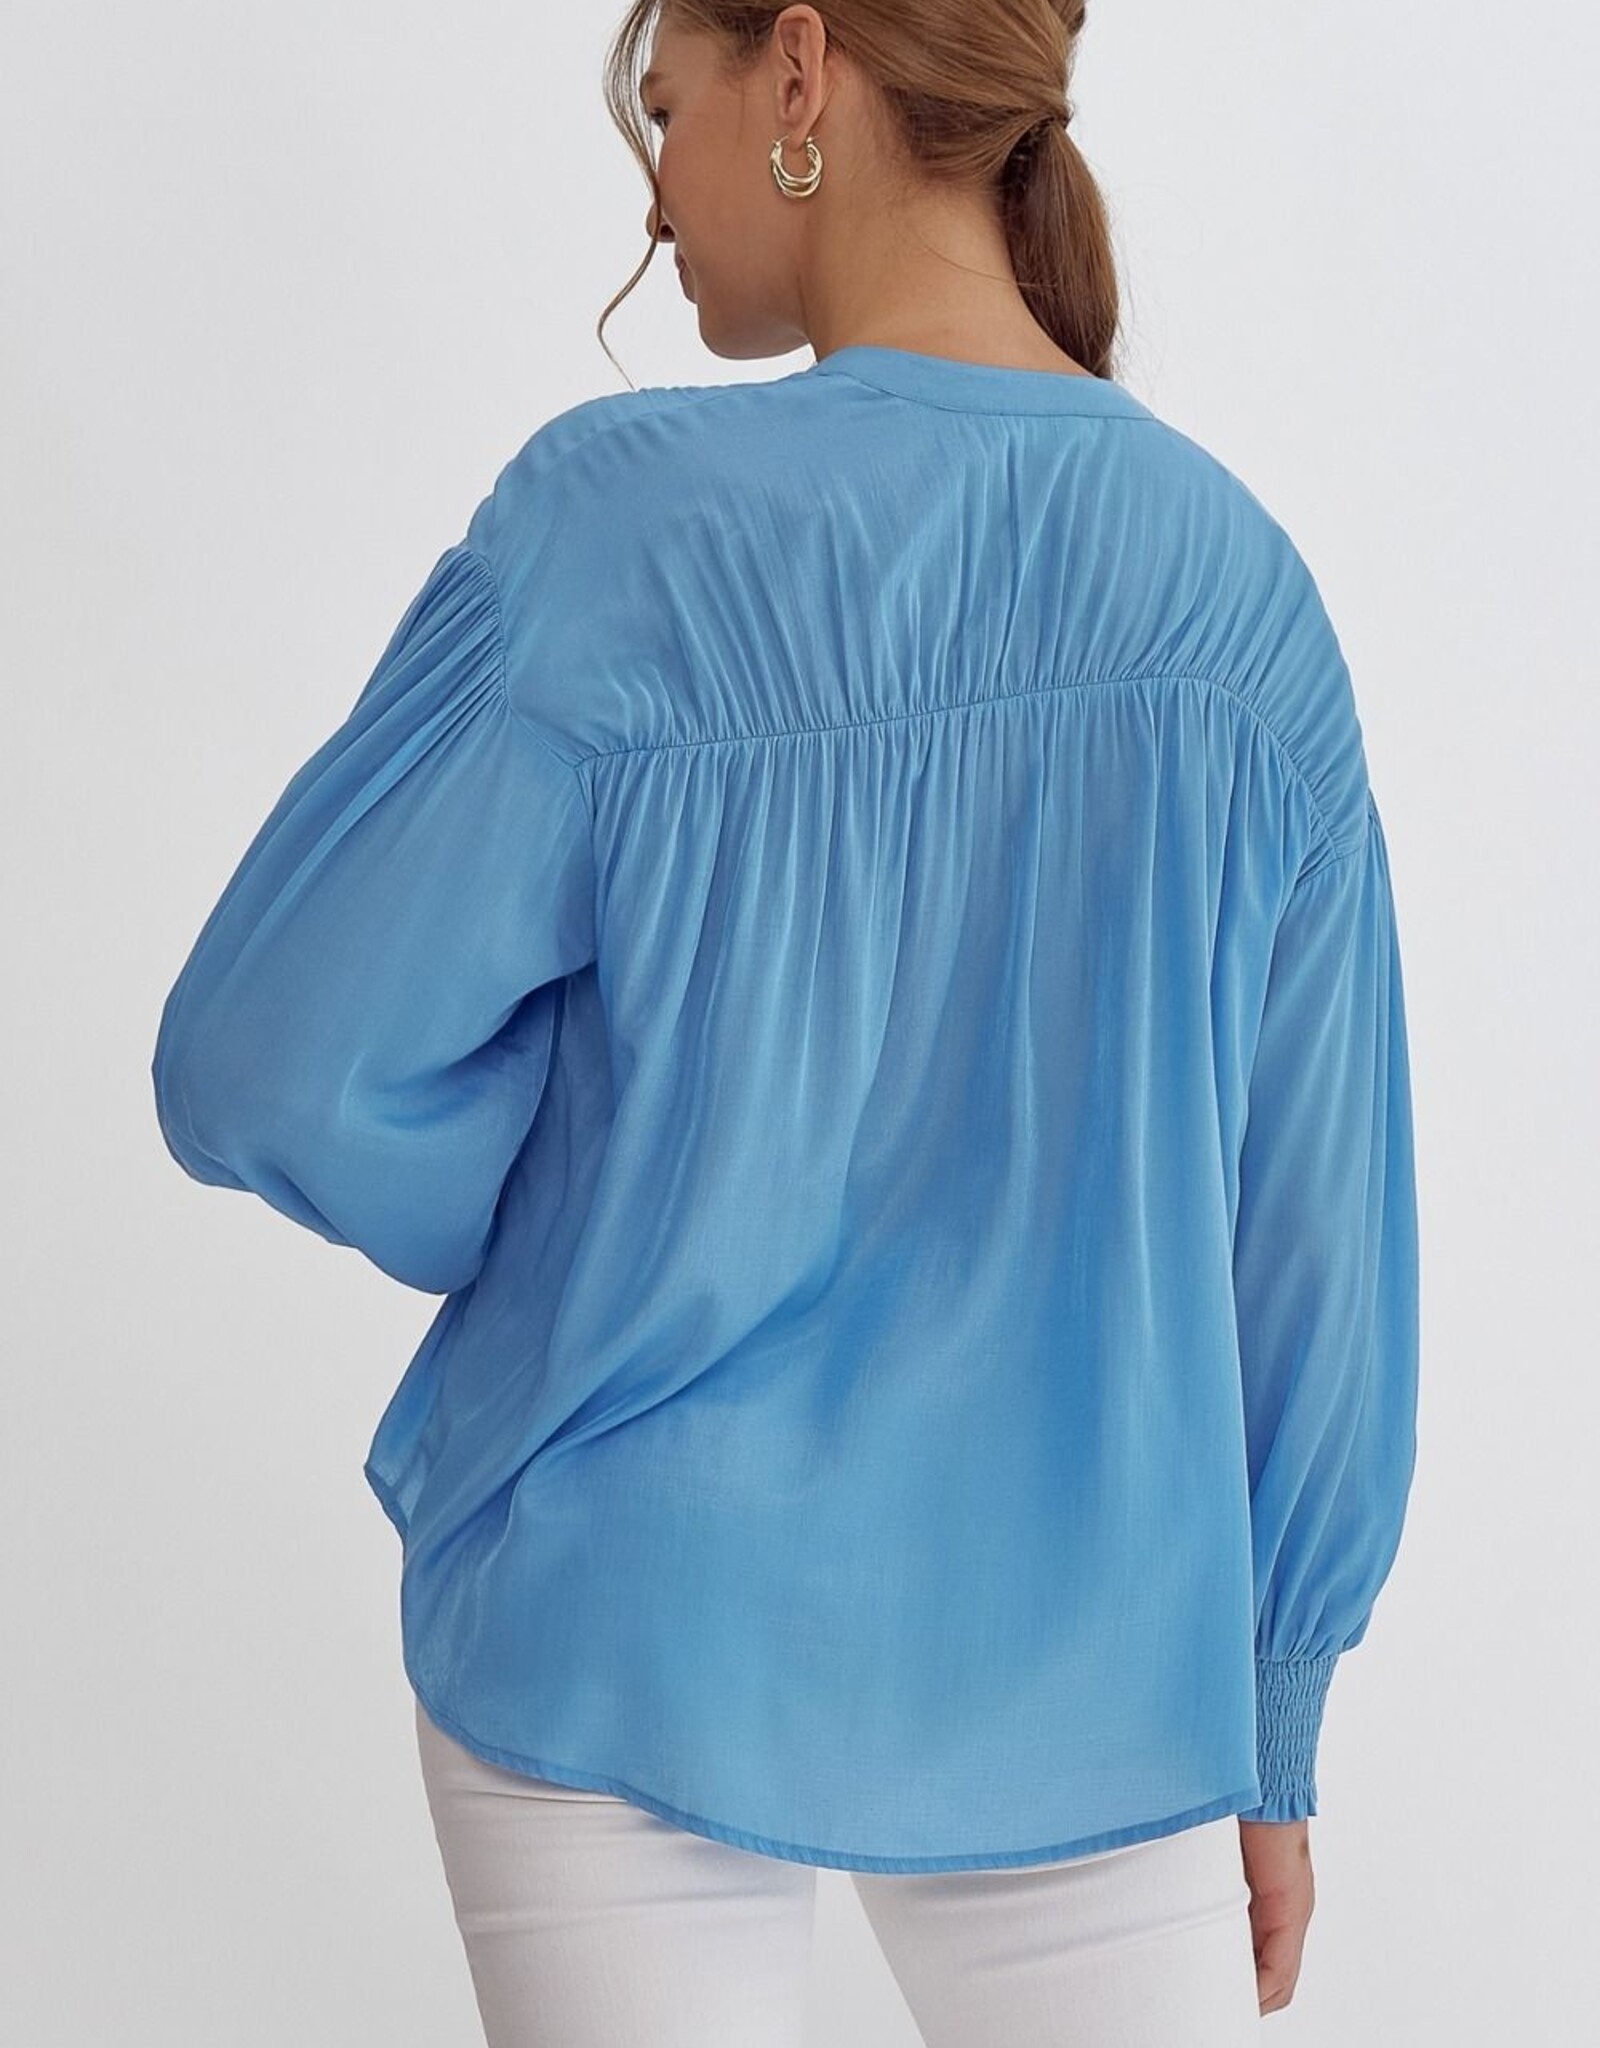 Solid Button Top w/ Pleated Detail